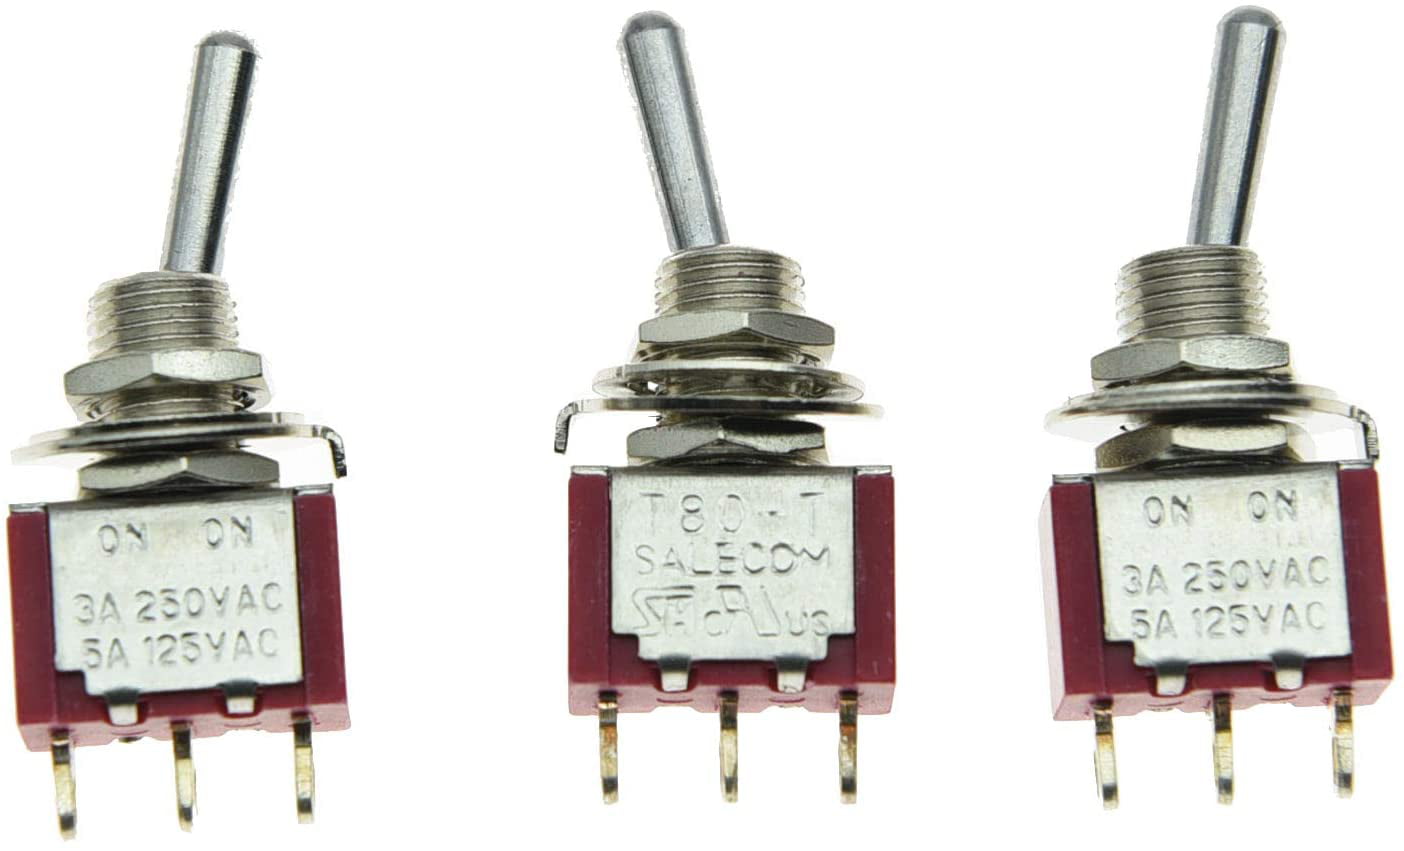 5x SPDT Guitar Mini Toggle Switch 2-Position ON-ON 3 PIN Car/Boat Switches